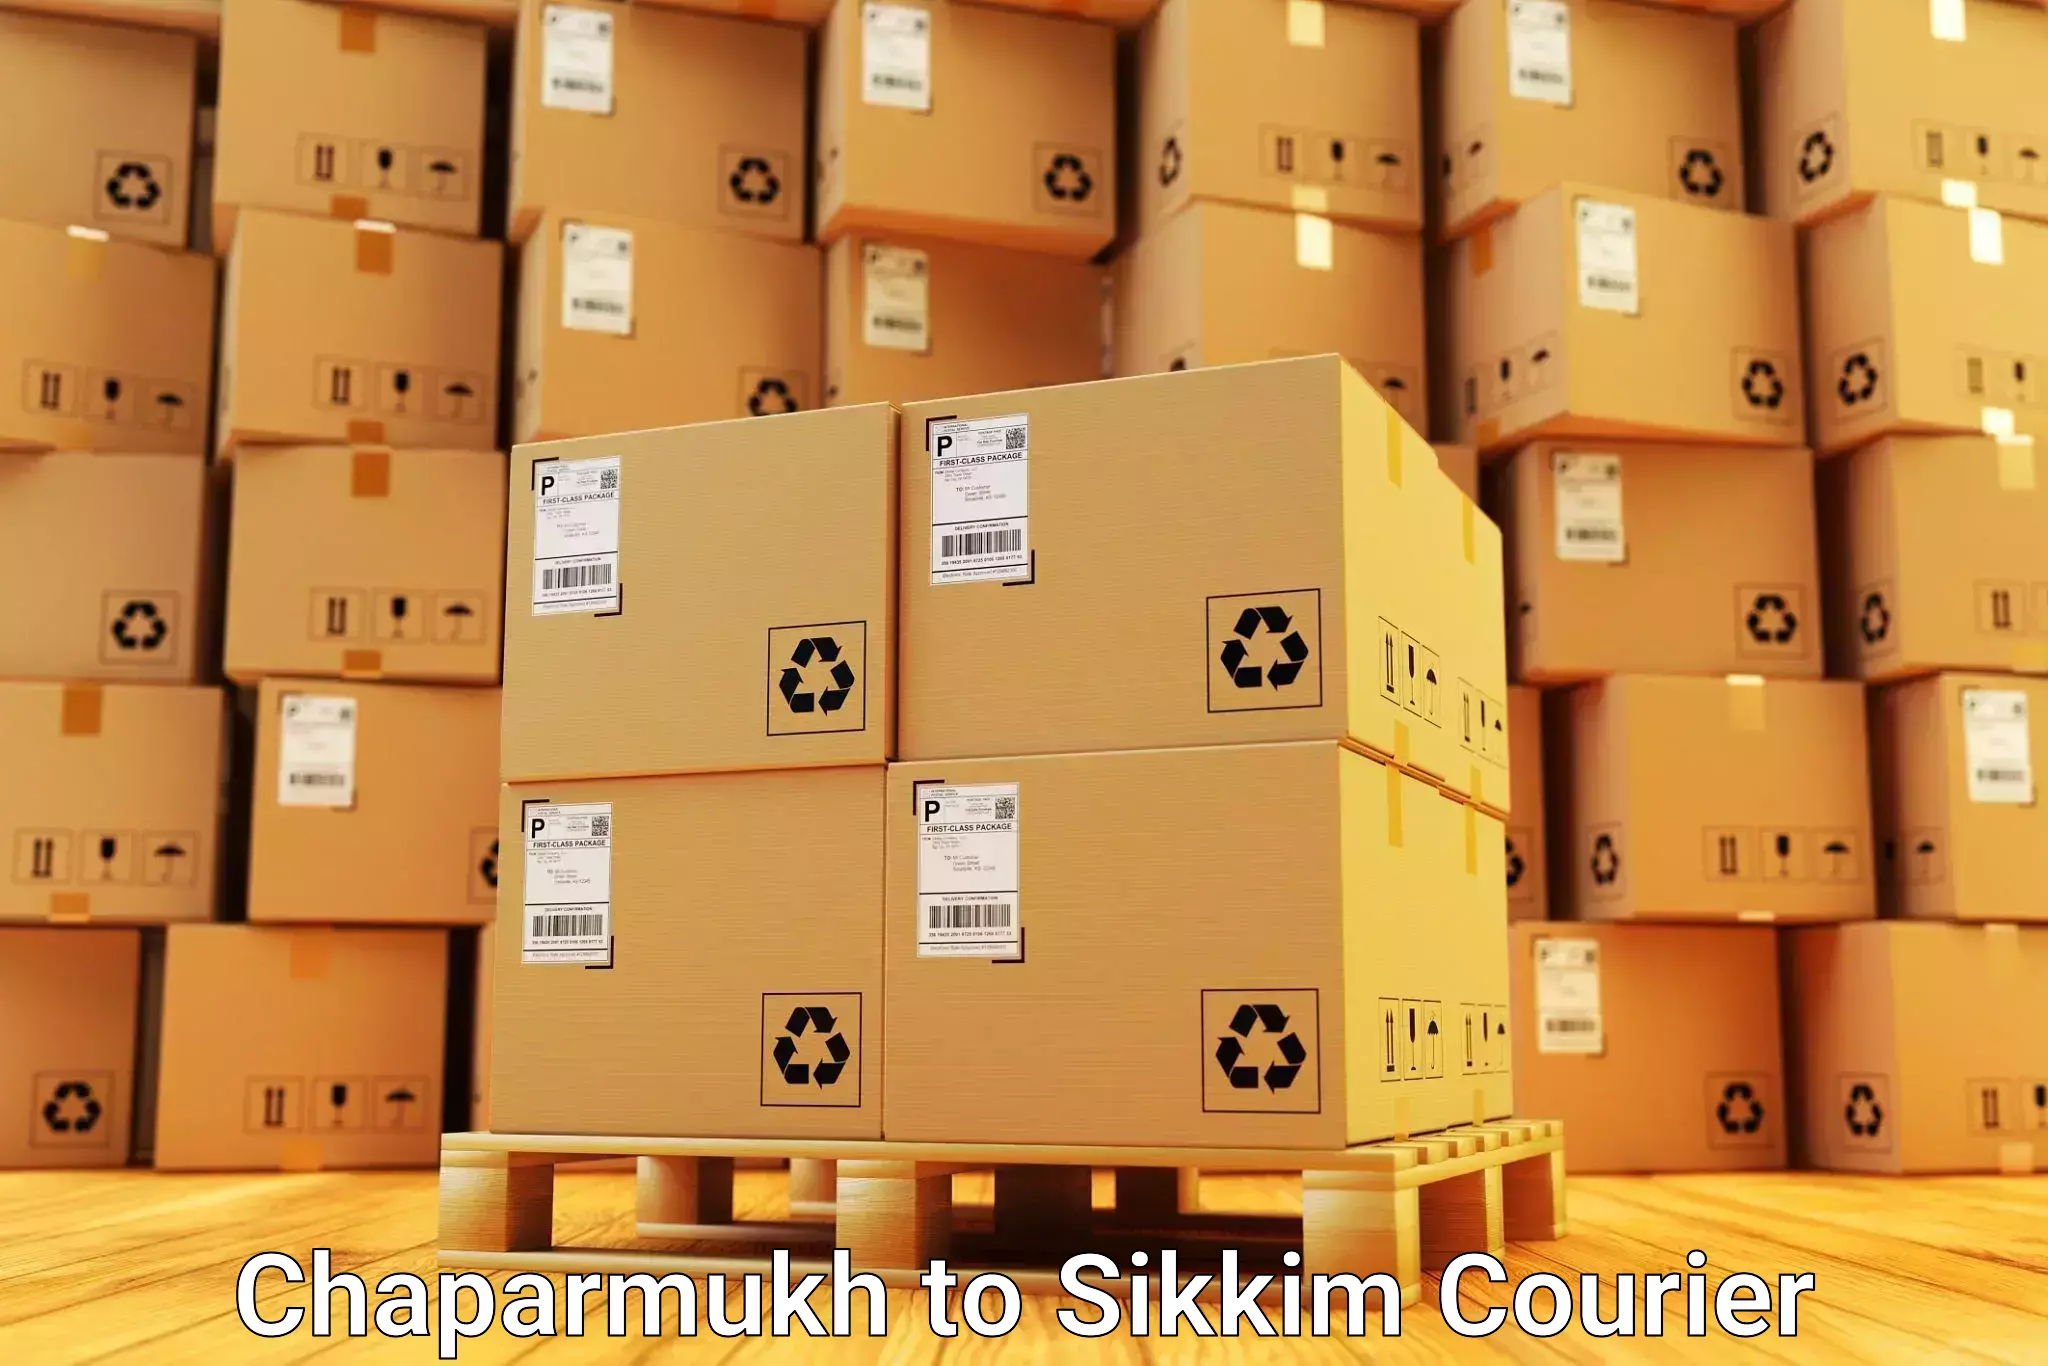 Quality moving company Chaparmukh to Sikkim